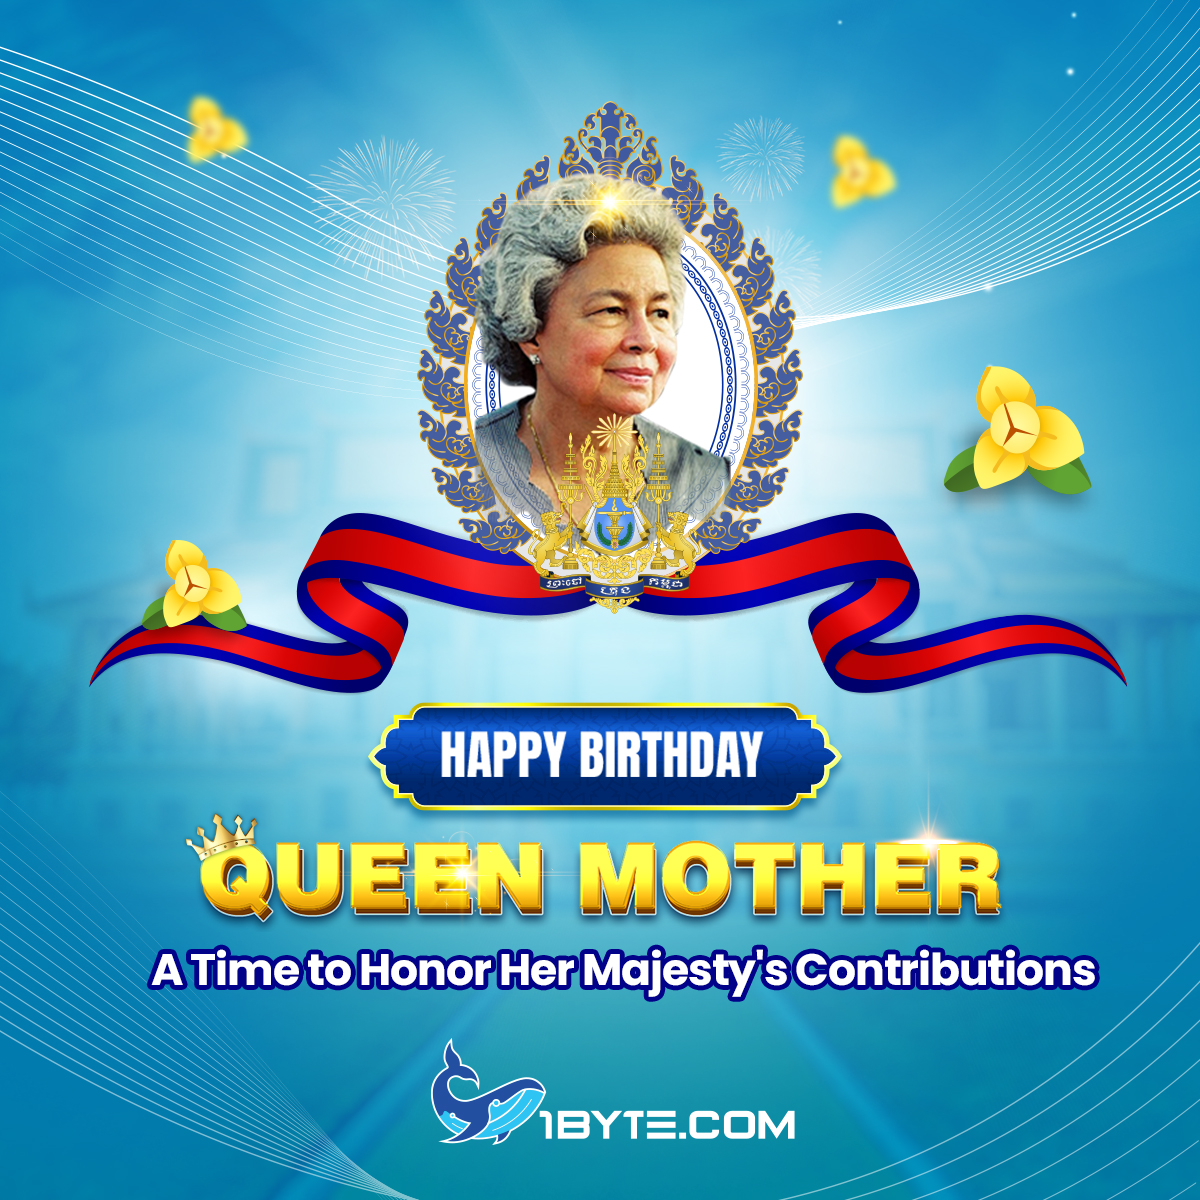 🎂QUEEN MOTHER'S BIRTHDAY

Today marks a special day for 1Byte and Cambodia as we celebrate the birthday of Queen Mother Norodom Monineath.

✅You can read more here: blog.1byte.com/queen-mothers-…

#Domains #AWS #Cambodia #SharedHosting #CloudHosting #QueenMother